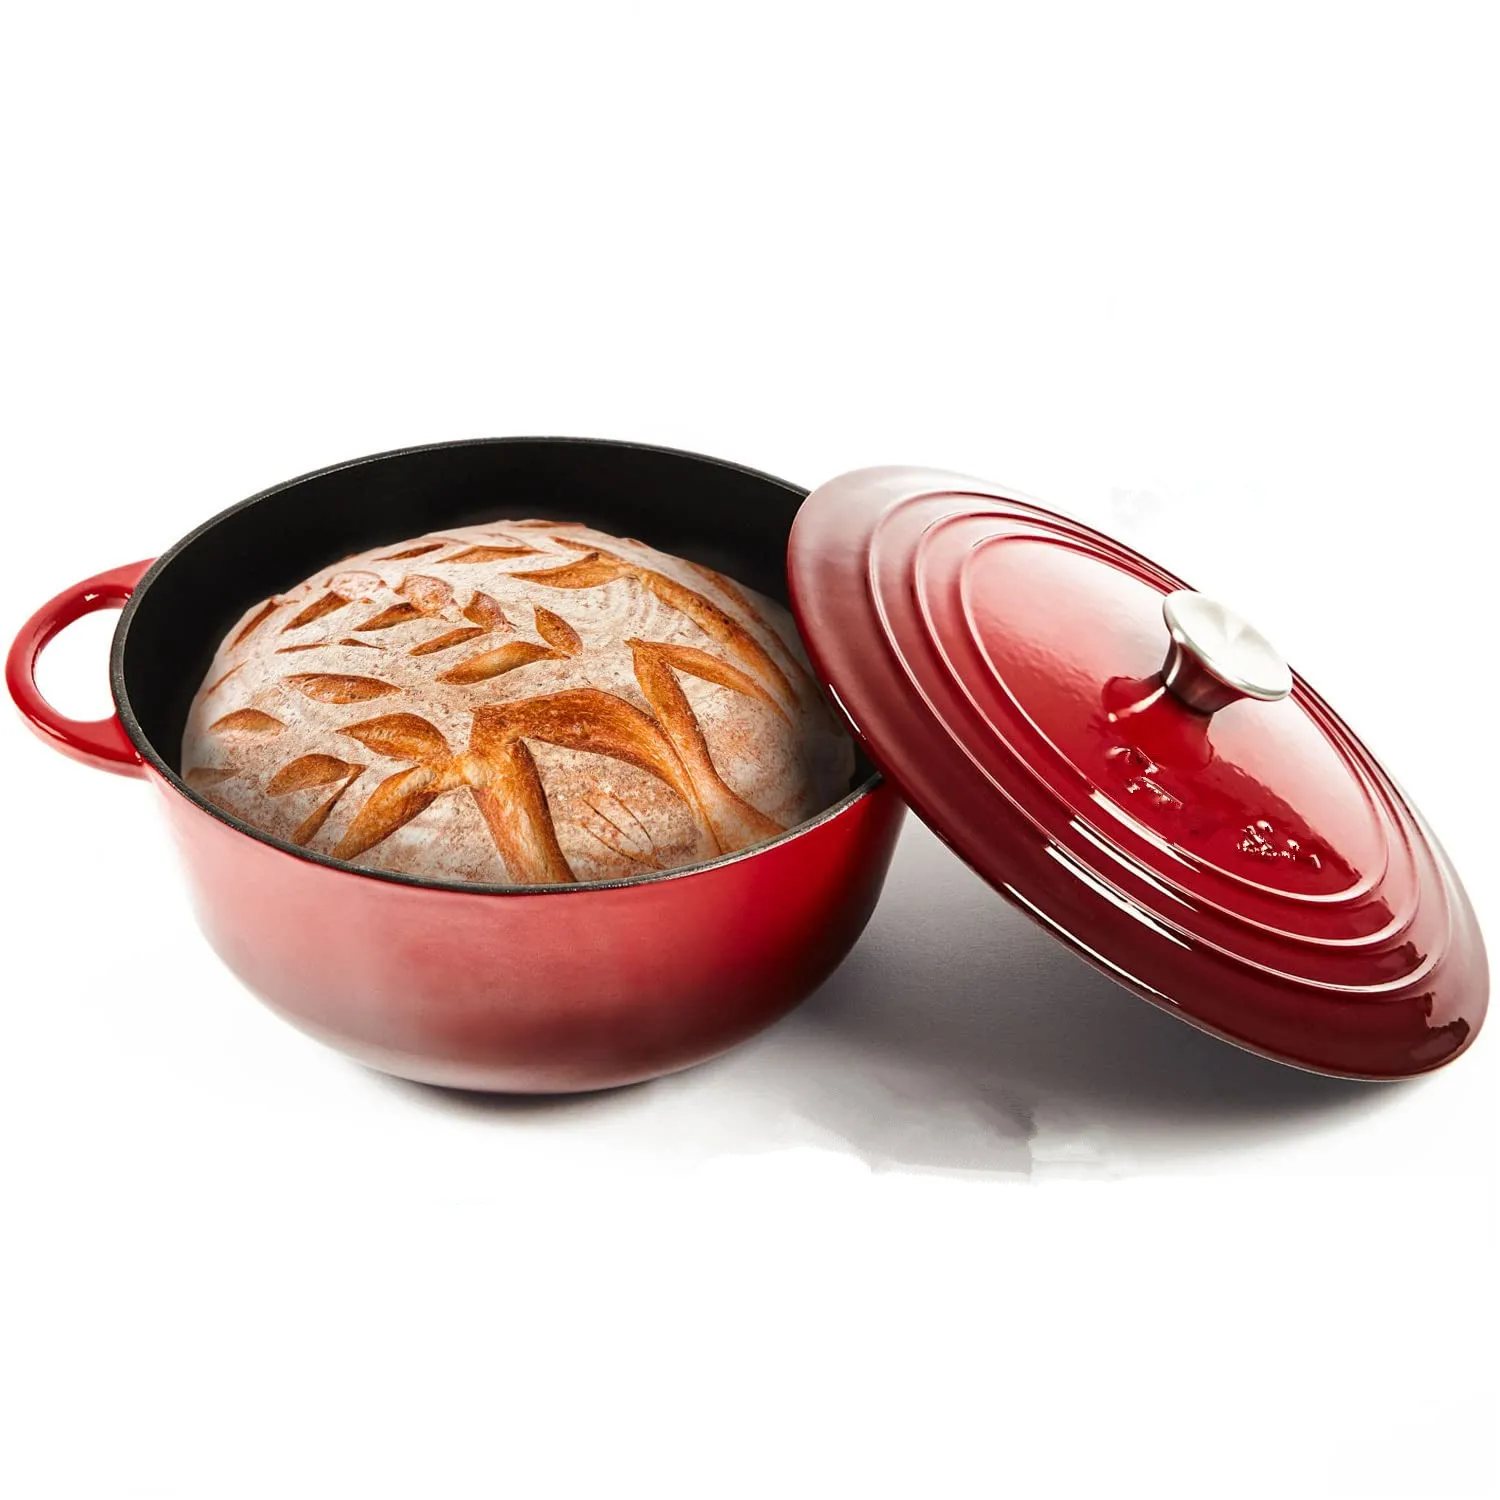 10CM Heart Shaped Red Dutch Oven Small Enameled Cast Iron Pot With Lid  Saucepan Casserole Kitchen Accessories Cooking Tools - AliExpress